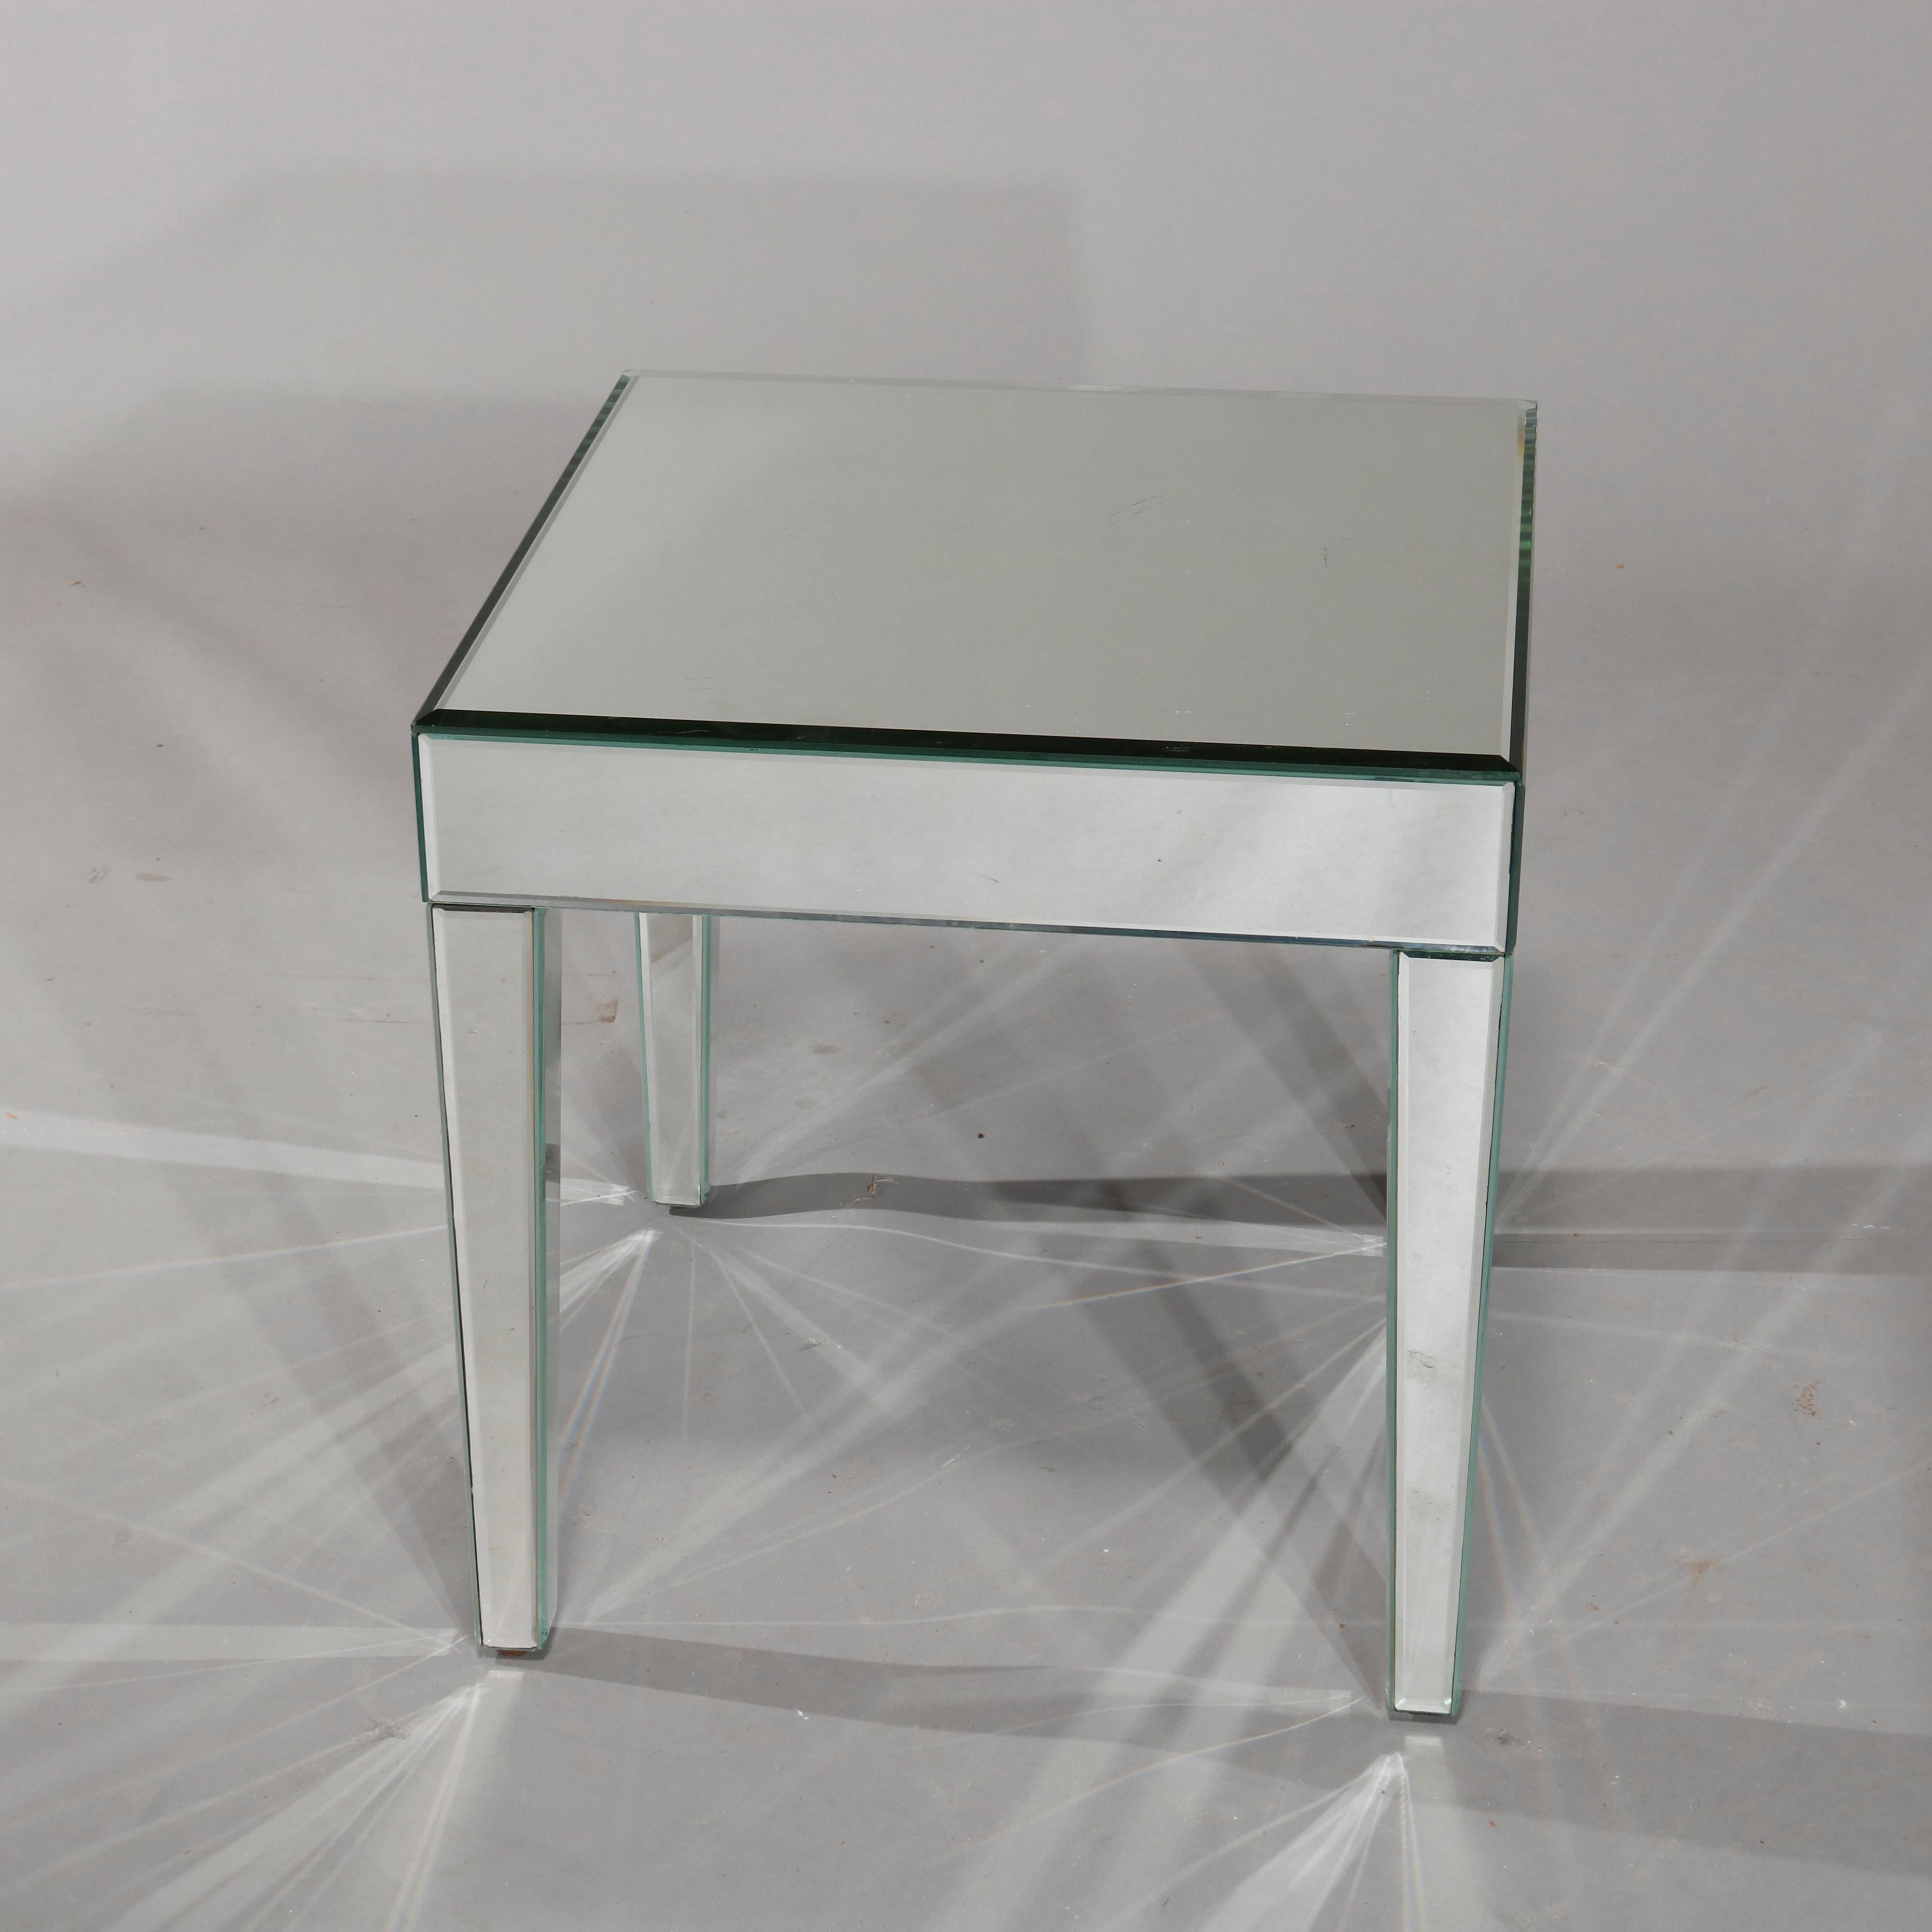 20th Century Pair of Mid-Century Modern Mirrored Glass Side Tables, circa 1960